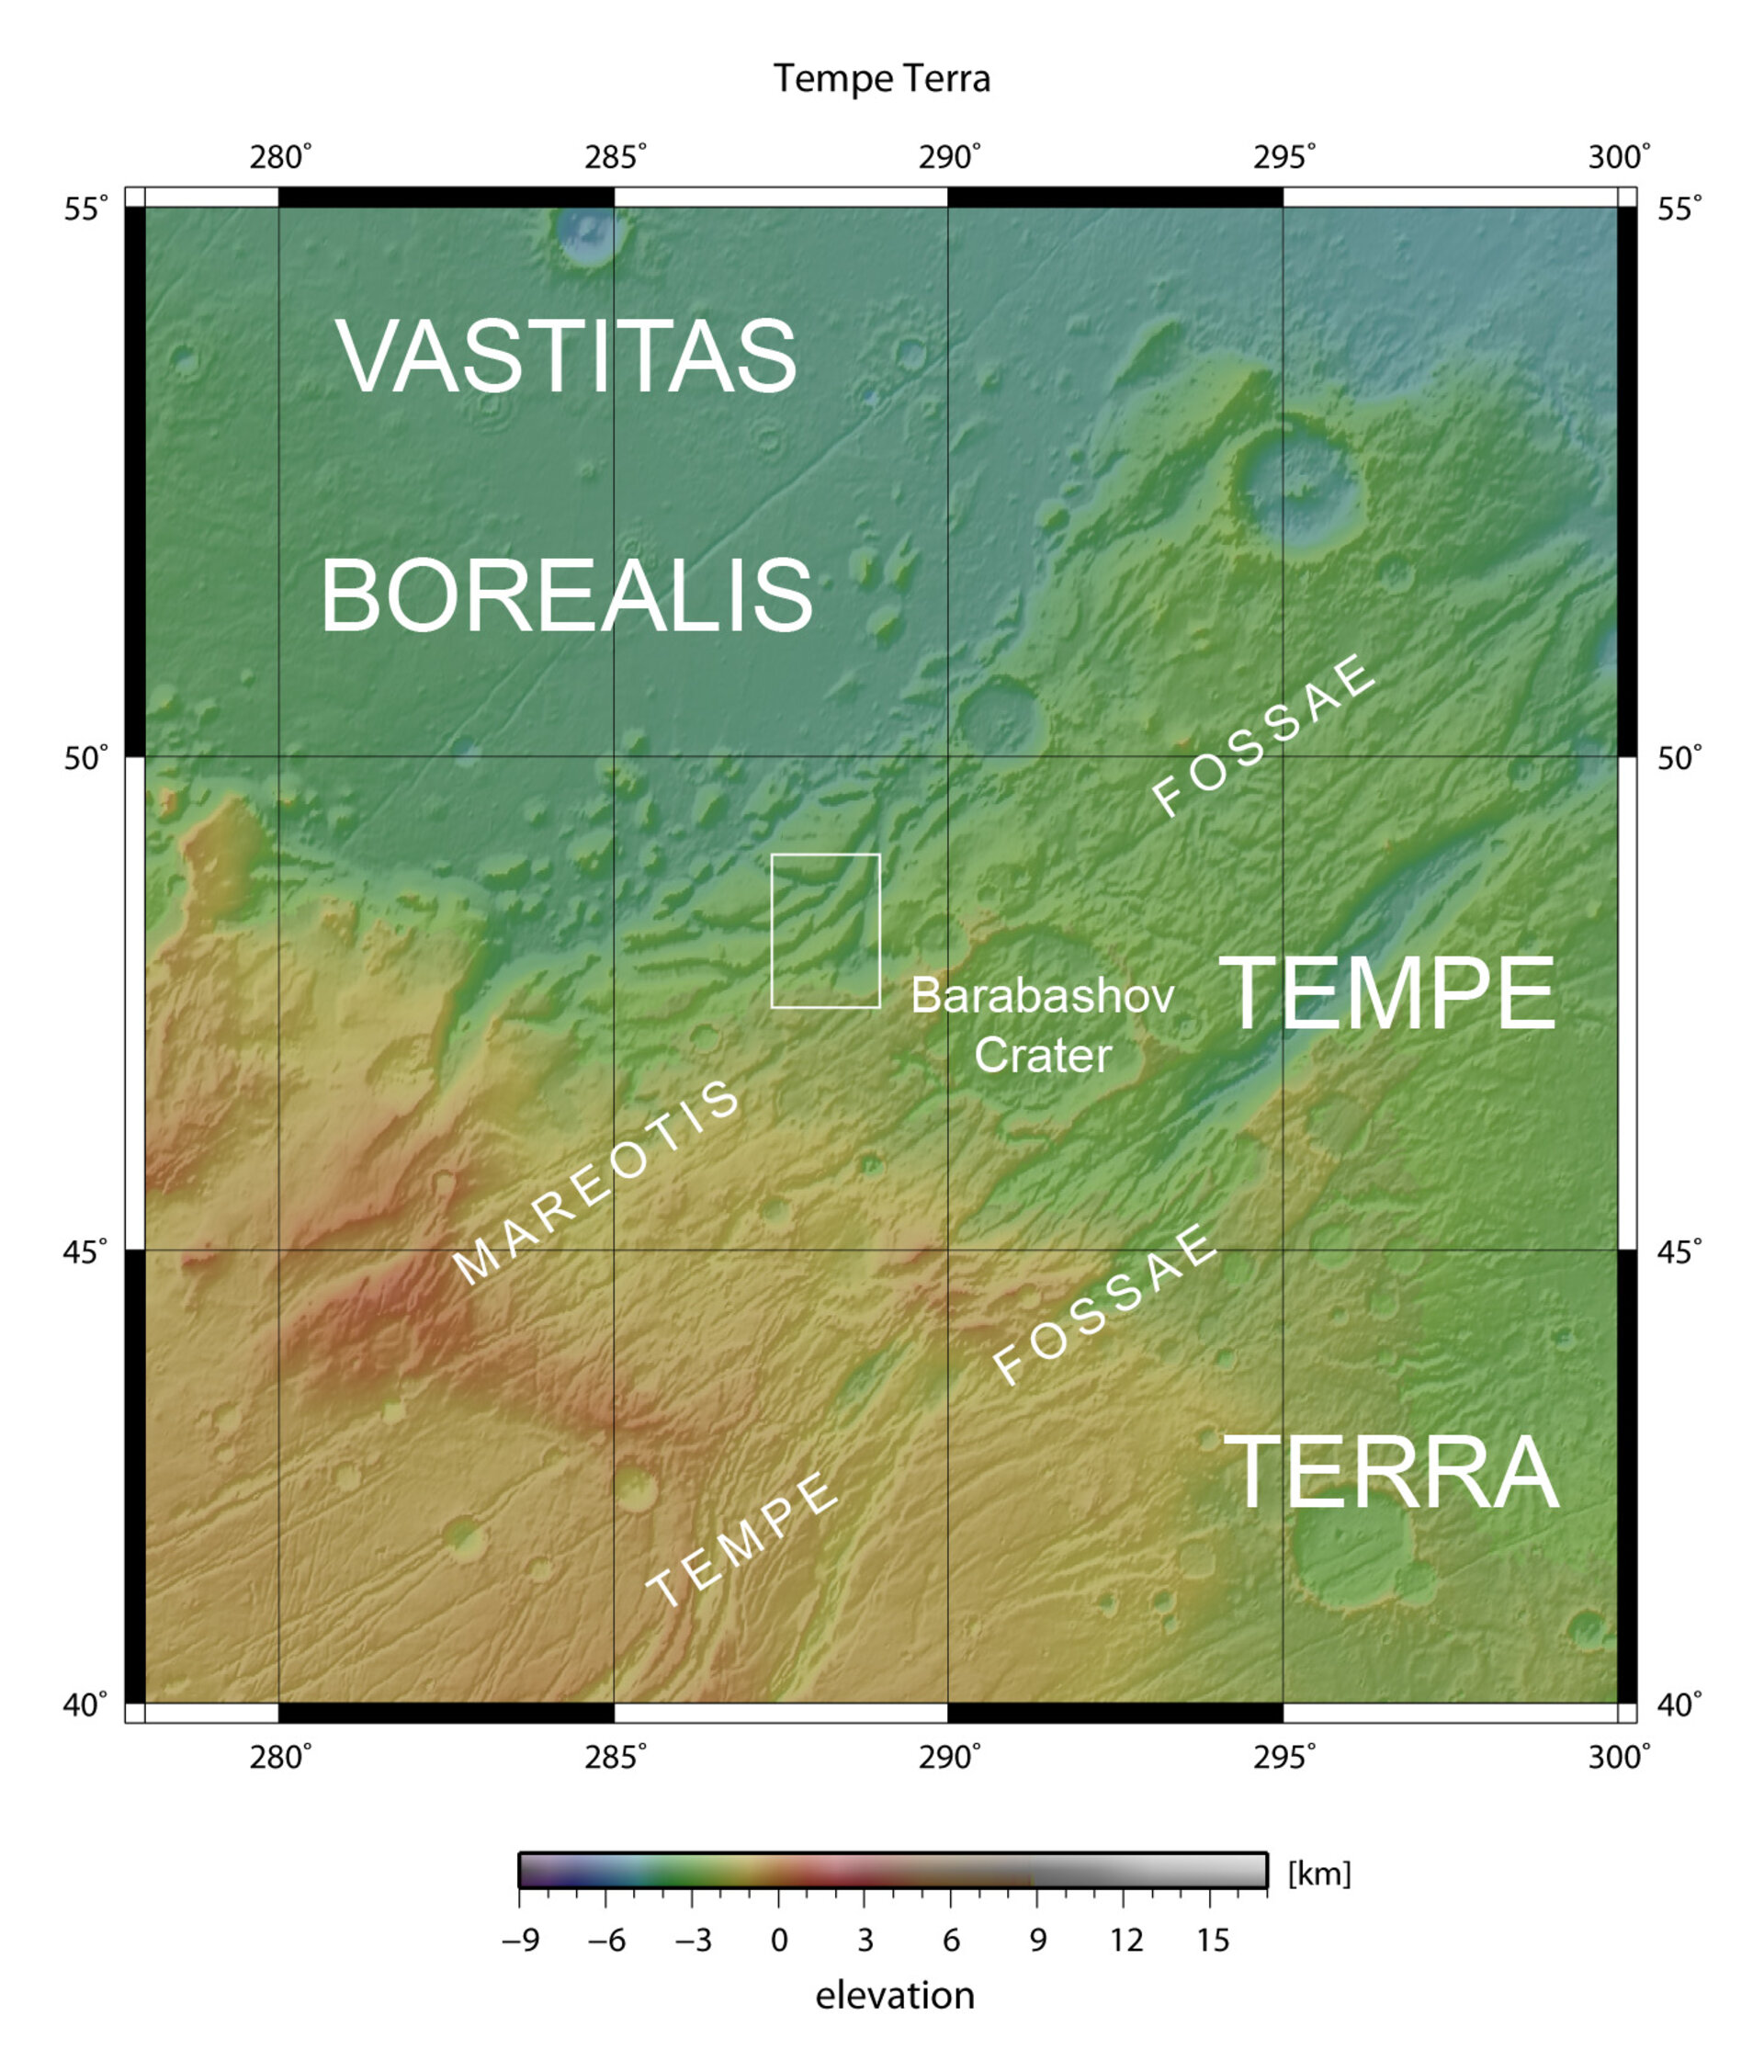 Map showing Tempe Terra in context